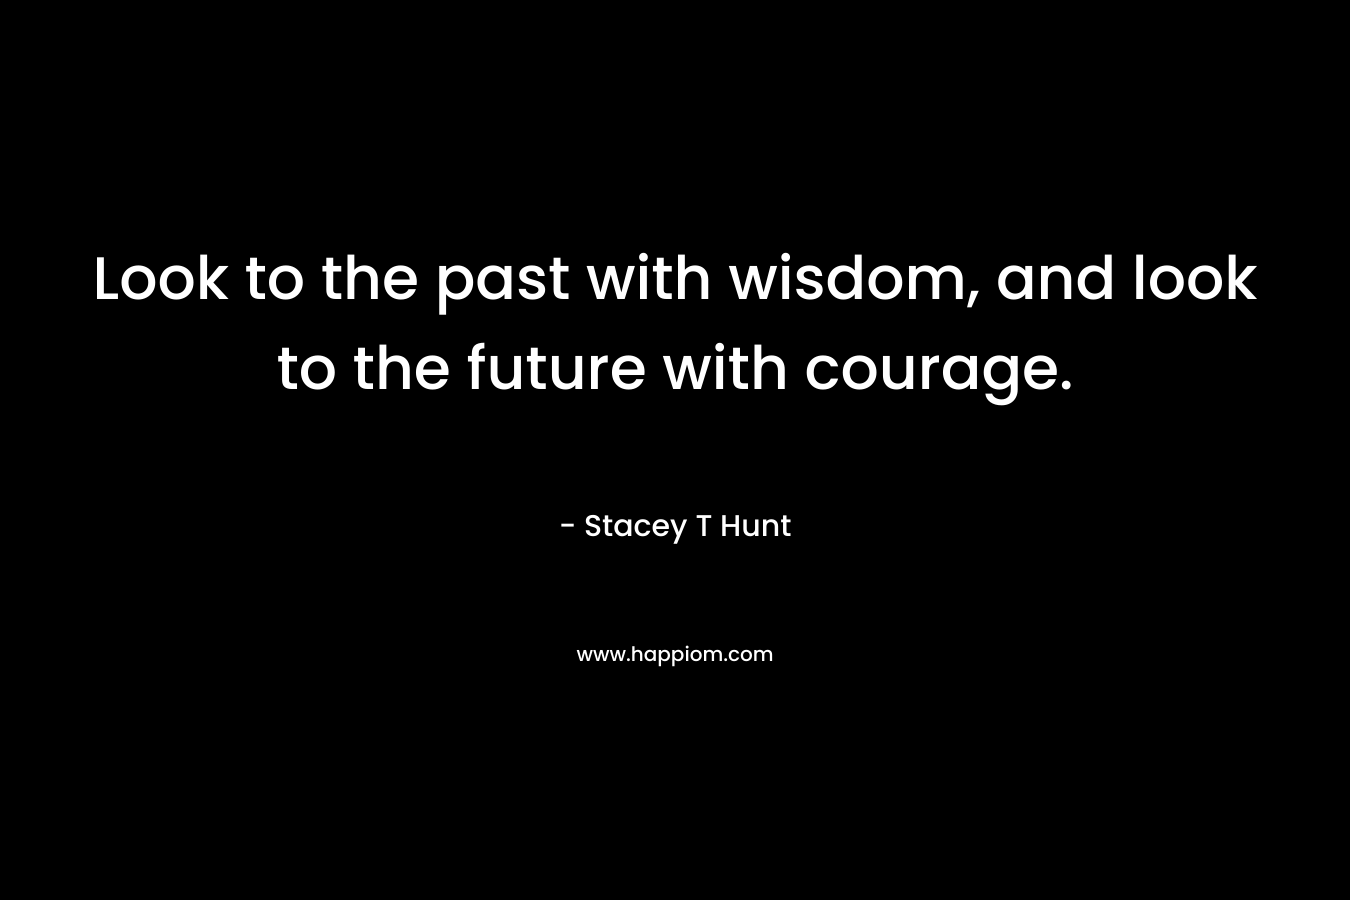 Look to the past with wisdom, and look to the future with courage. – Stacey T Hunt